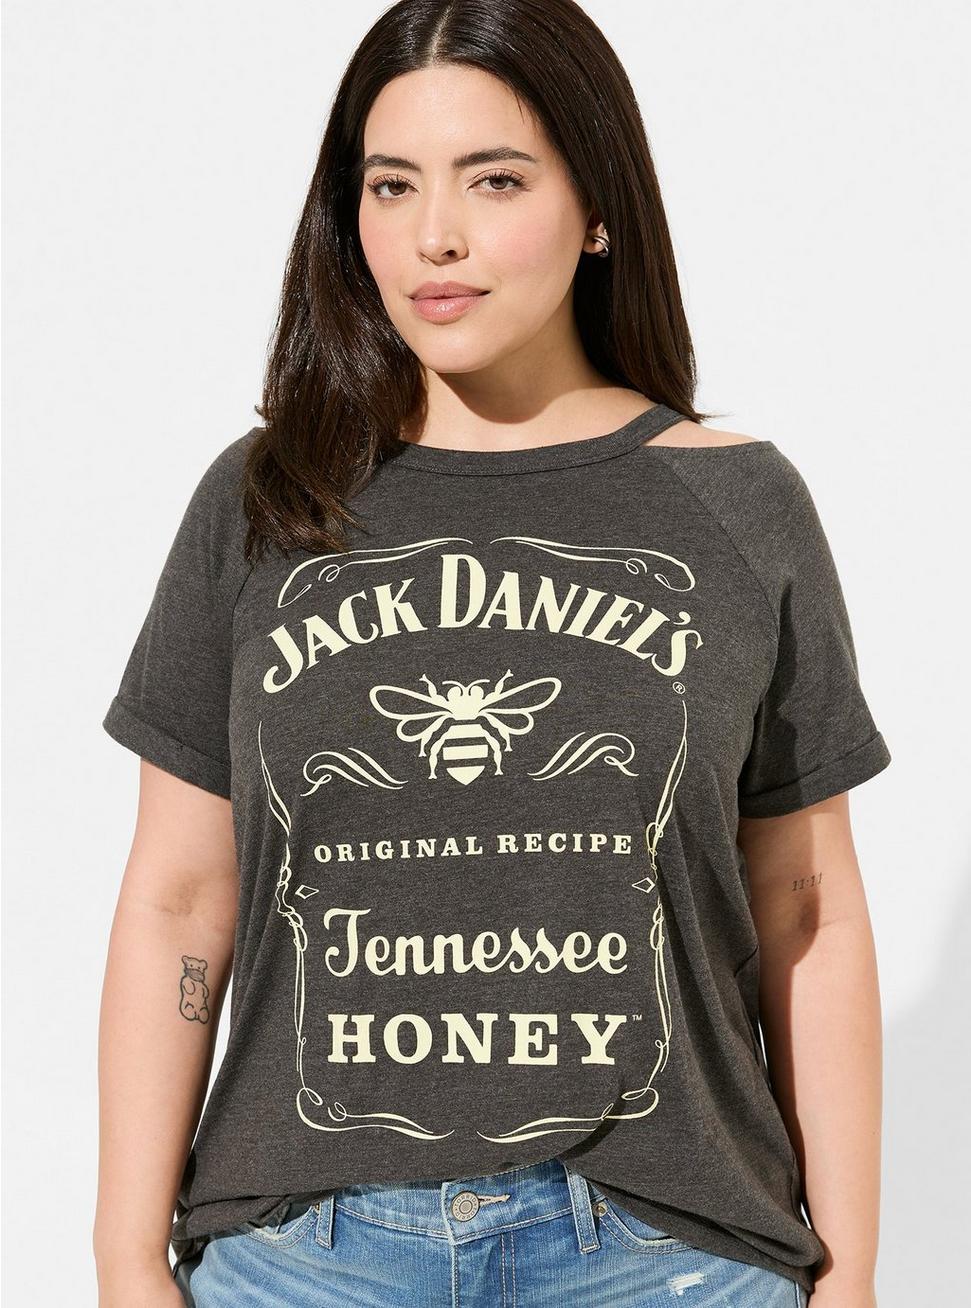 Jack Daniels Classic Fit Cotton Cold Shoulder Tee, CHARCOAL HEATHER GREY, alternate